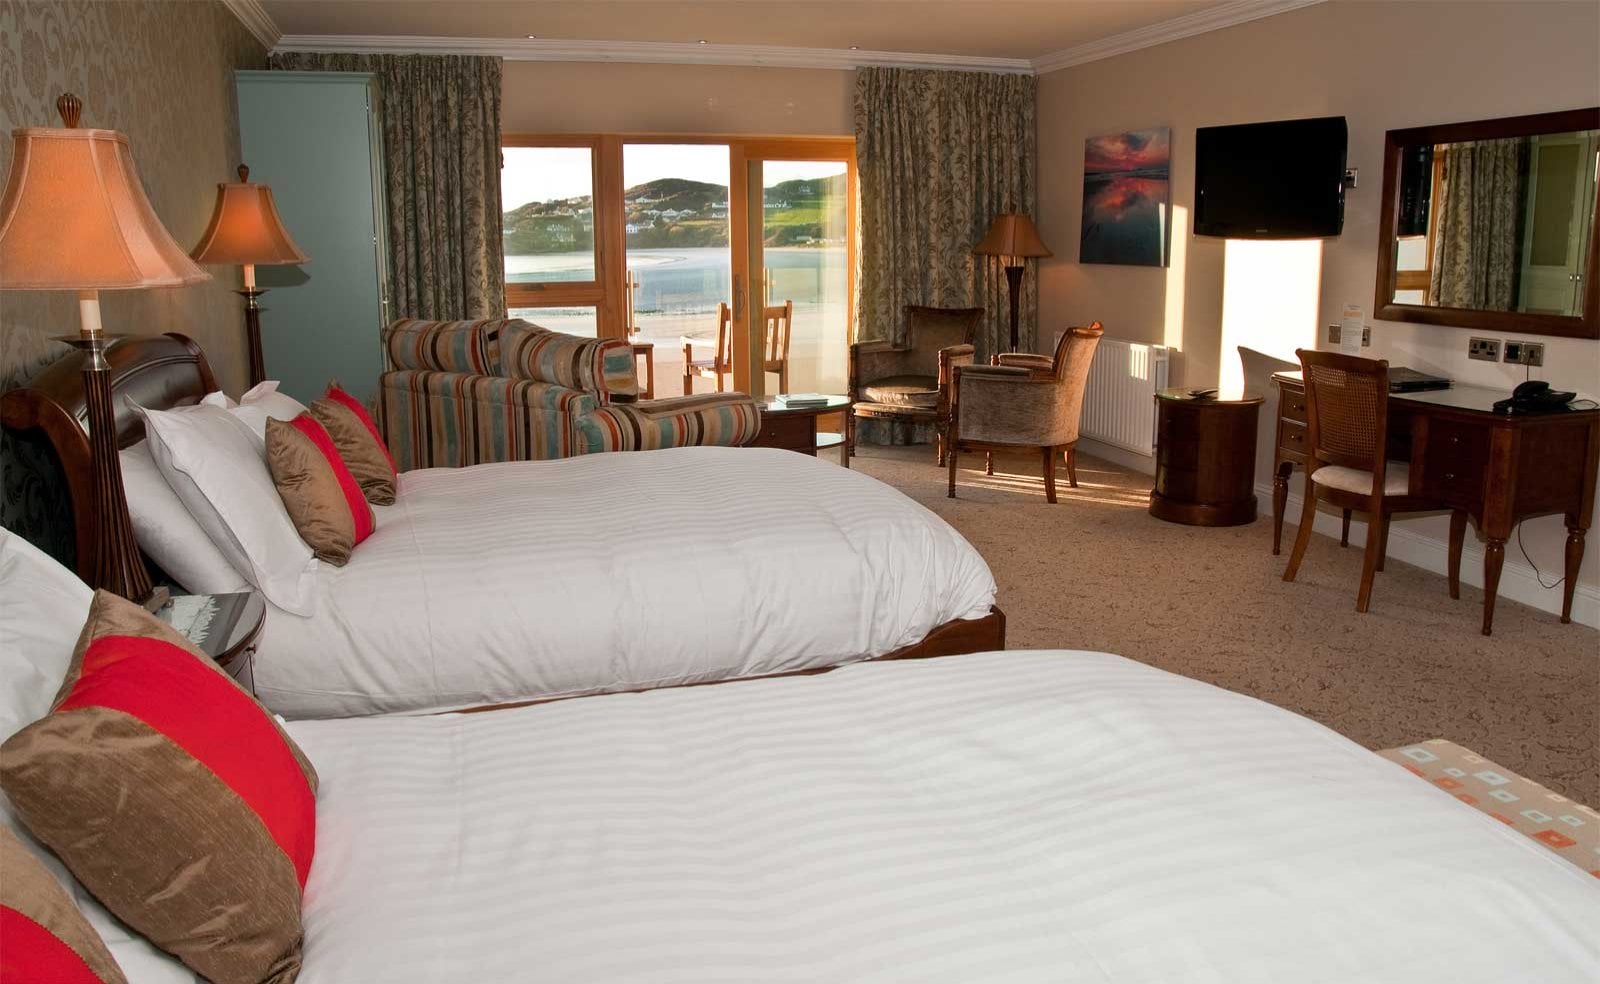 Interior view of a sea-side twin bedroom at Rosapenna Golf Resort, Ireland